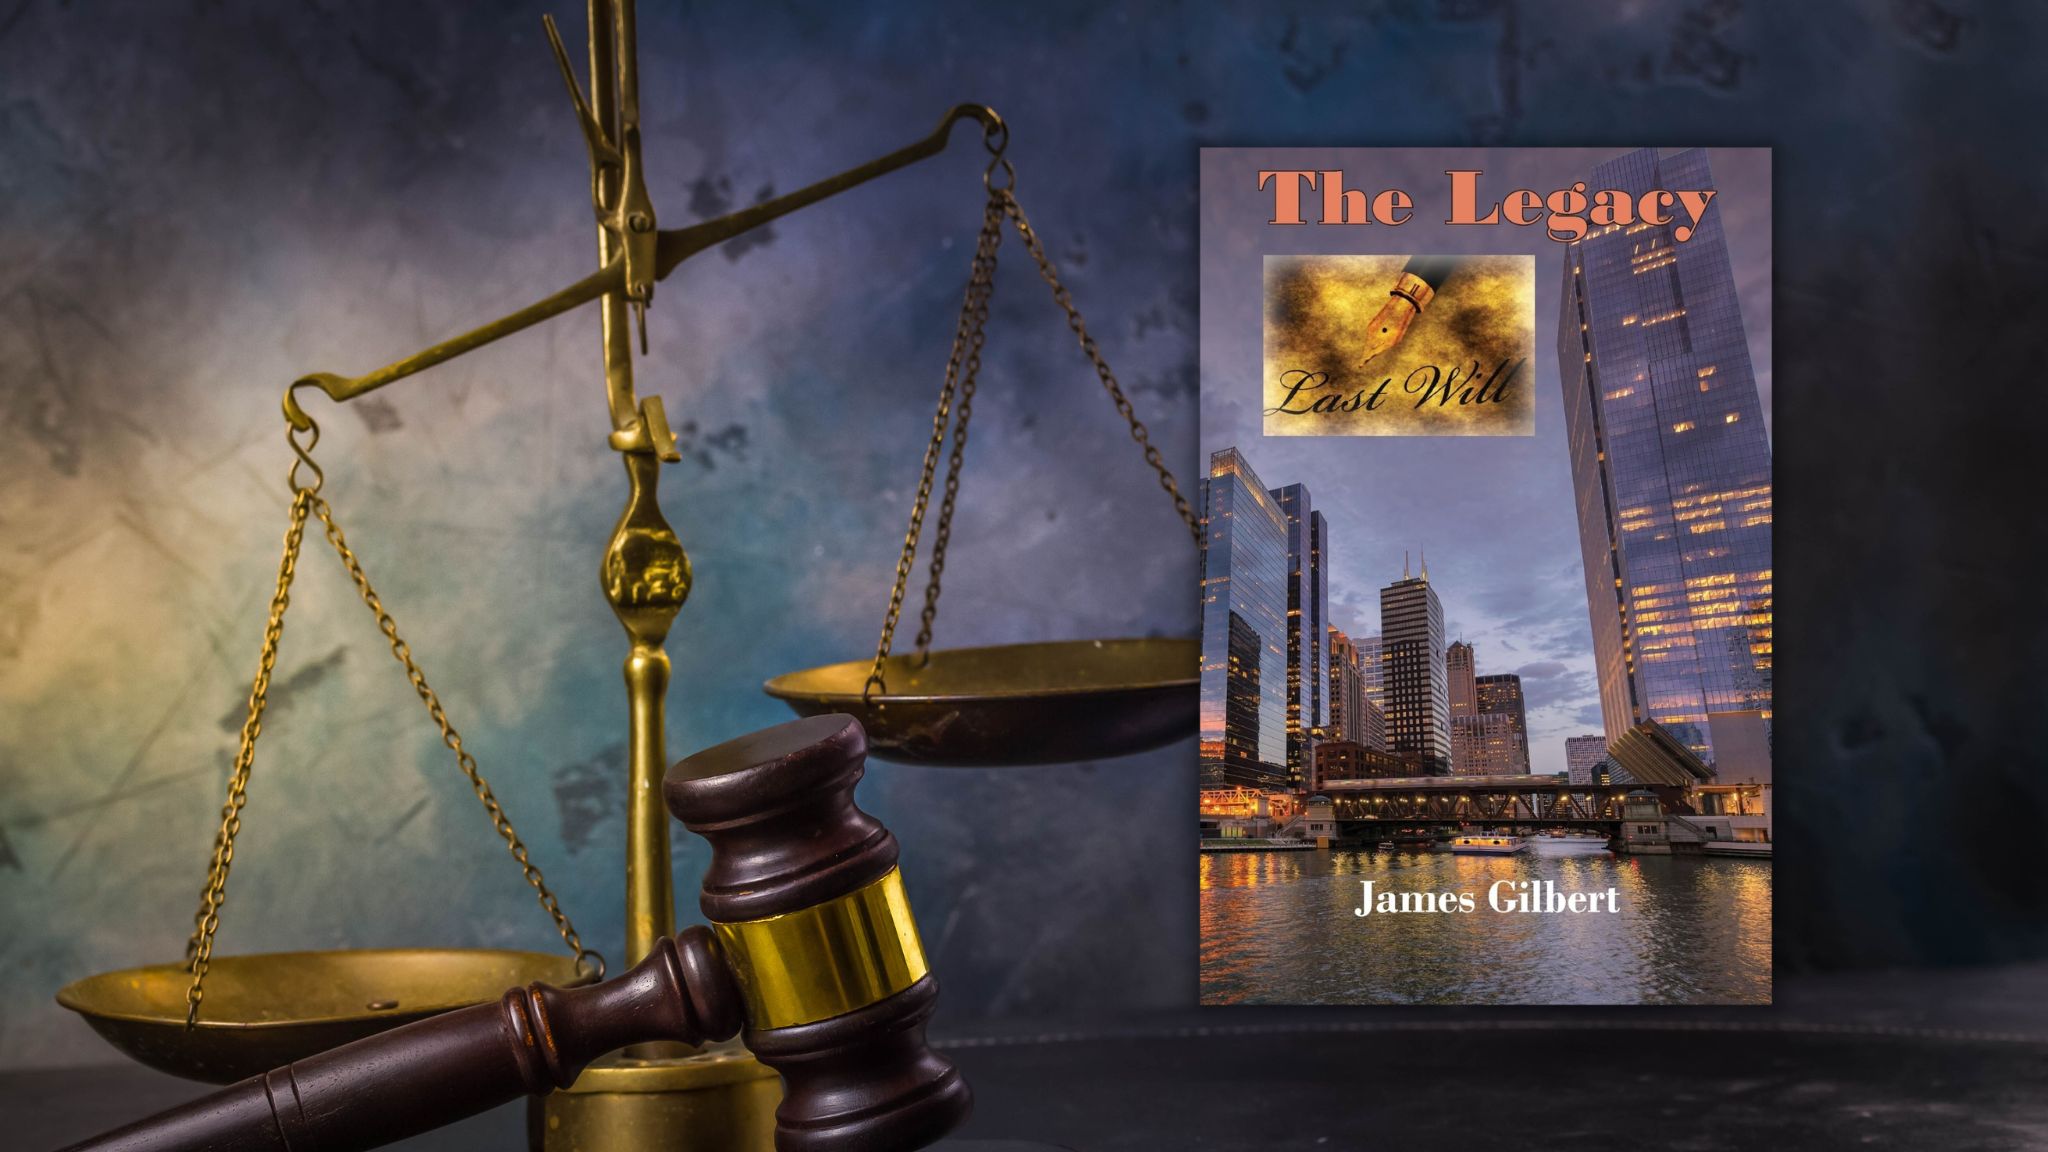 The Legacy by James Gilbert